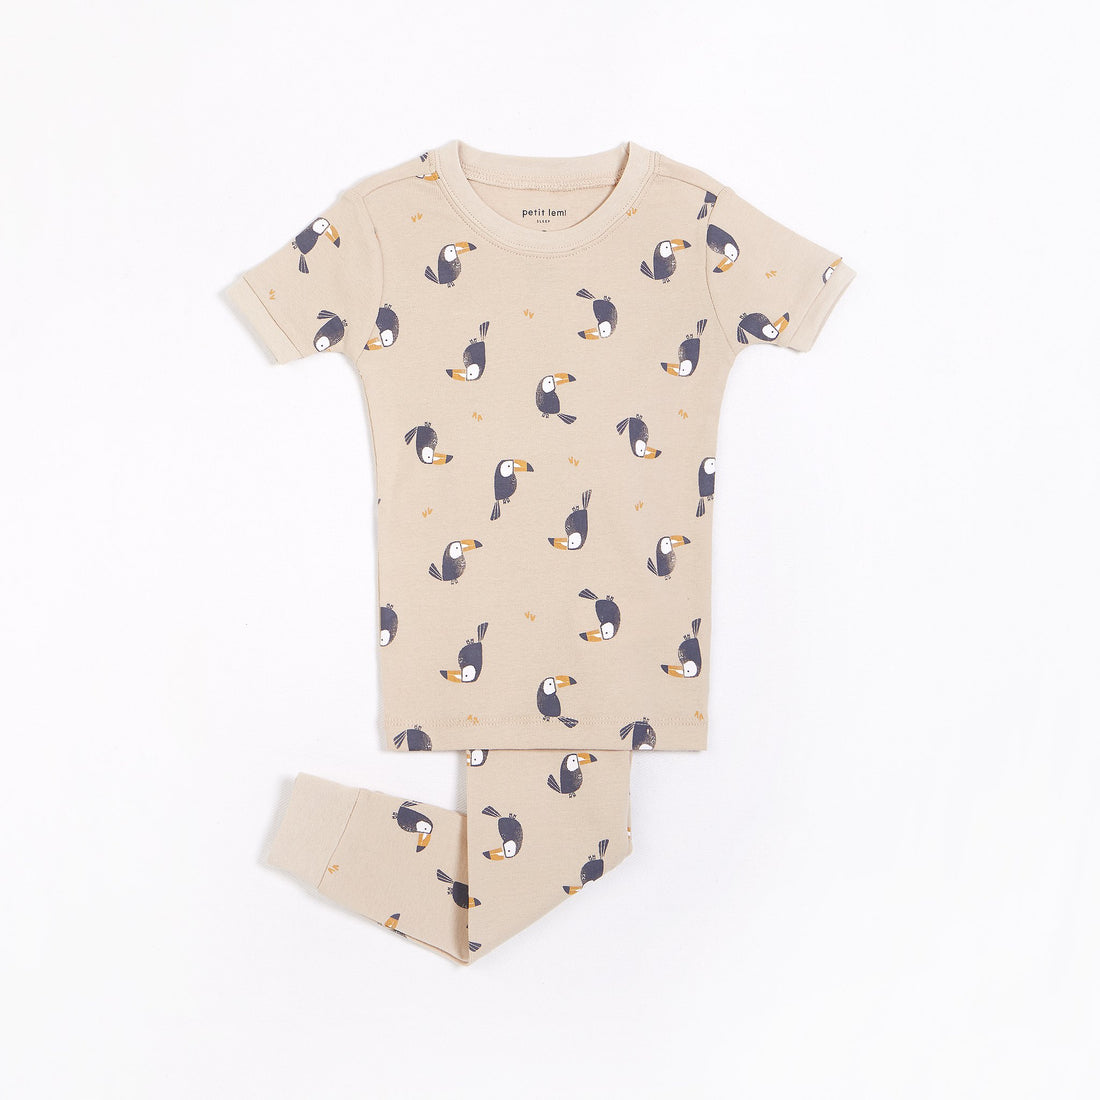 Toucan Print on Taupe Short-Sleeved PJ Set